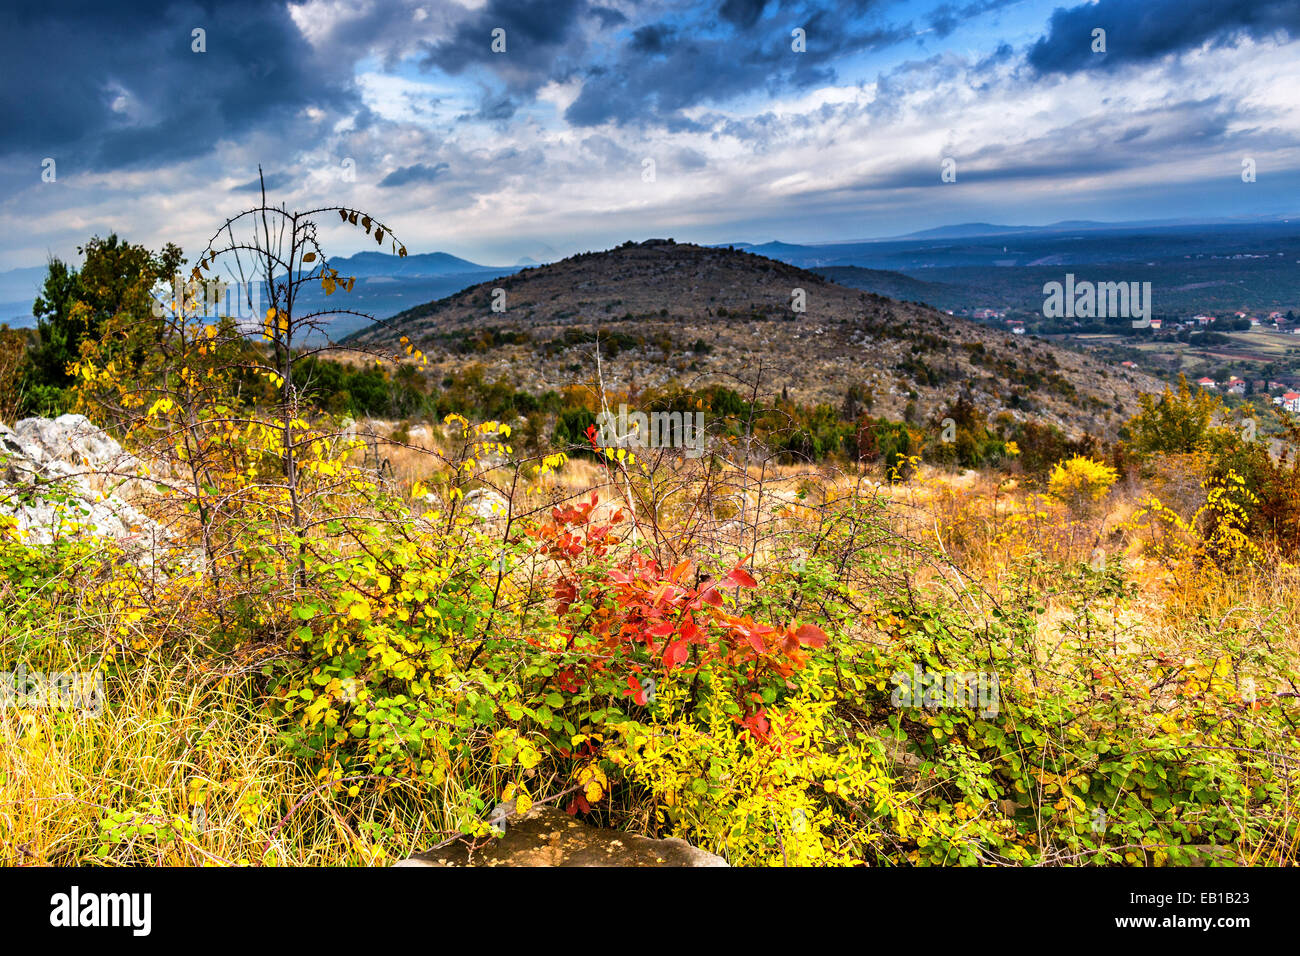 Autumn View of the Krizevac (Cross) Mountain in Medjugorje in Bosnia ed Erzegovina: brownish trees, green weeds, orange and yellow leaves and grey rocks Stock Photo